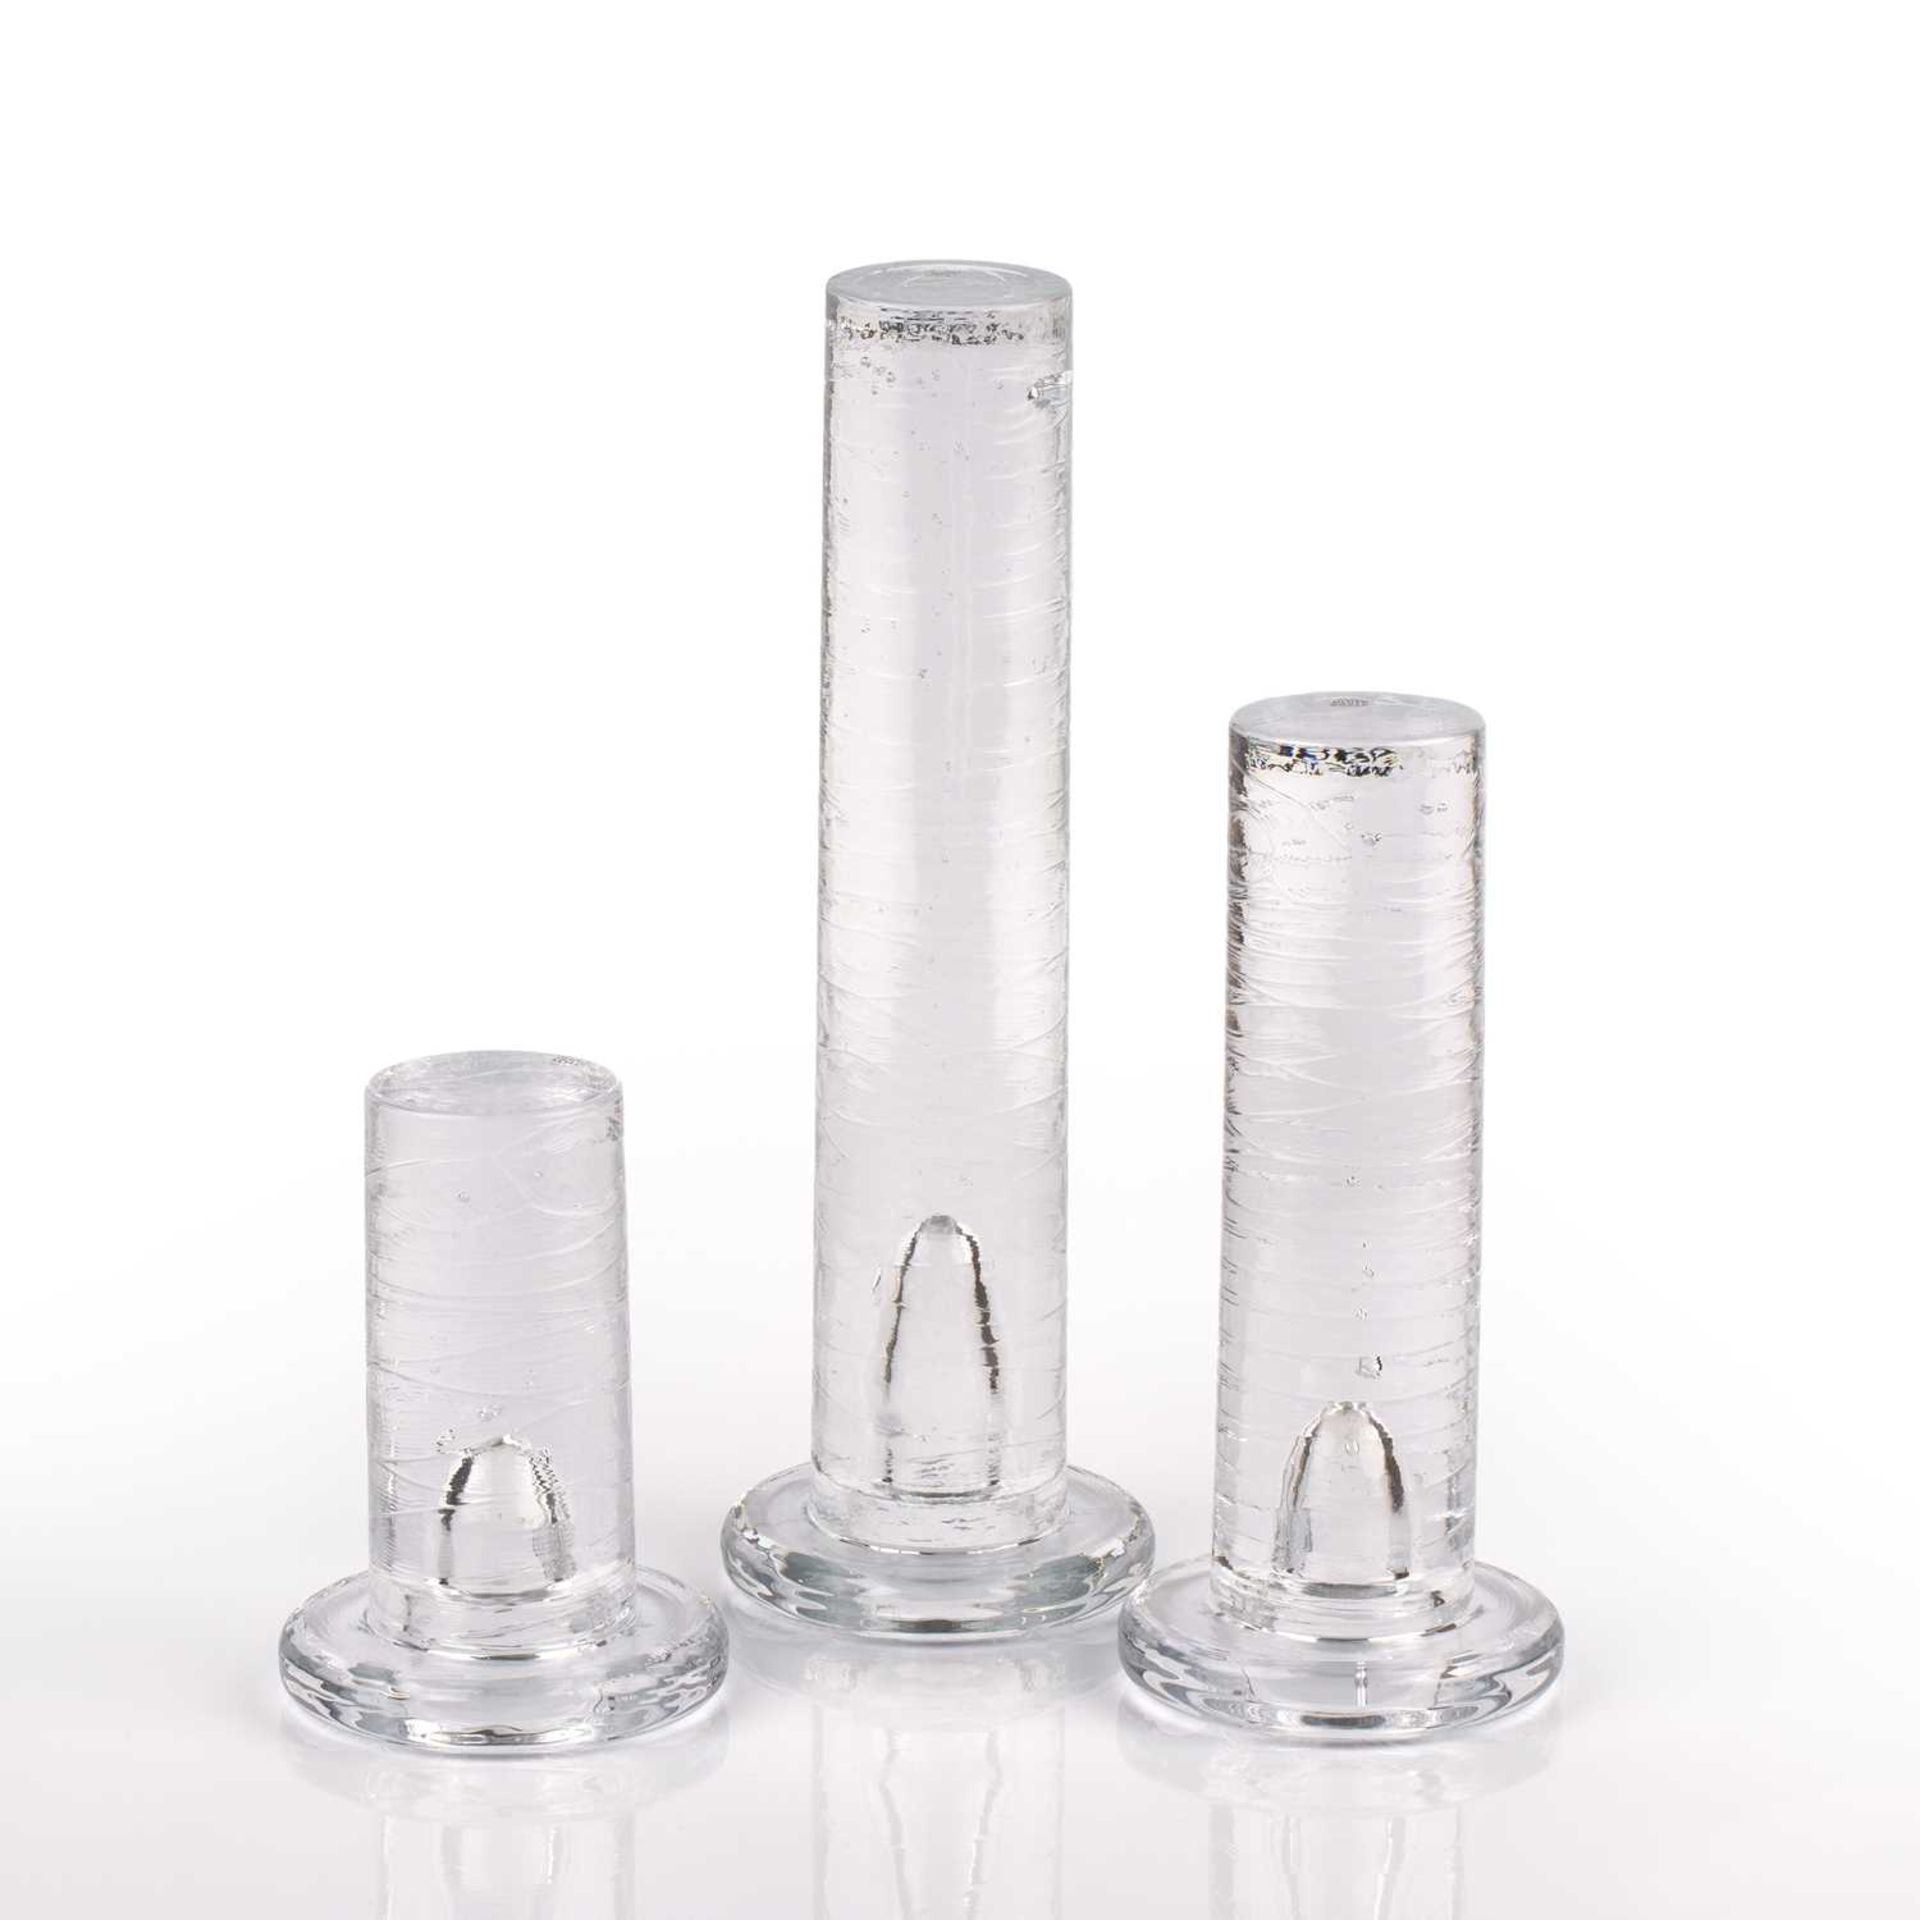 Kosta Boda Three graduated candle holders clear glass the tallest 30cm high. - Image 2 of 4